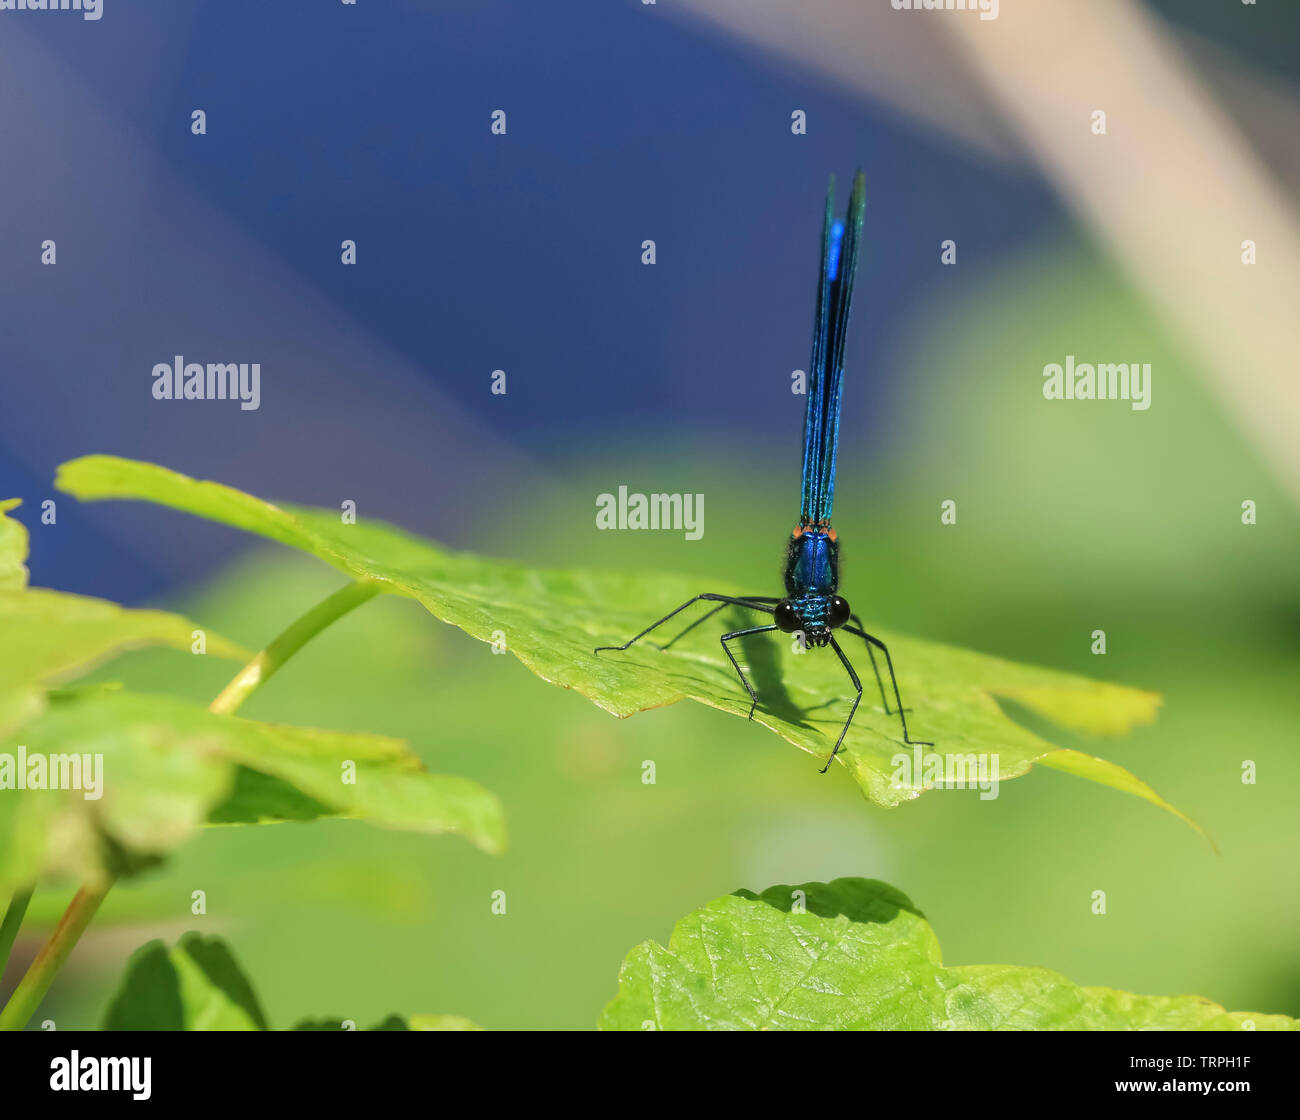 Detailed, macro, front view close up of a wild UK damselfly insect (Zygoptera) isolated outdoors in the sunshine, perched on a single, green leaf. Stock Photo